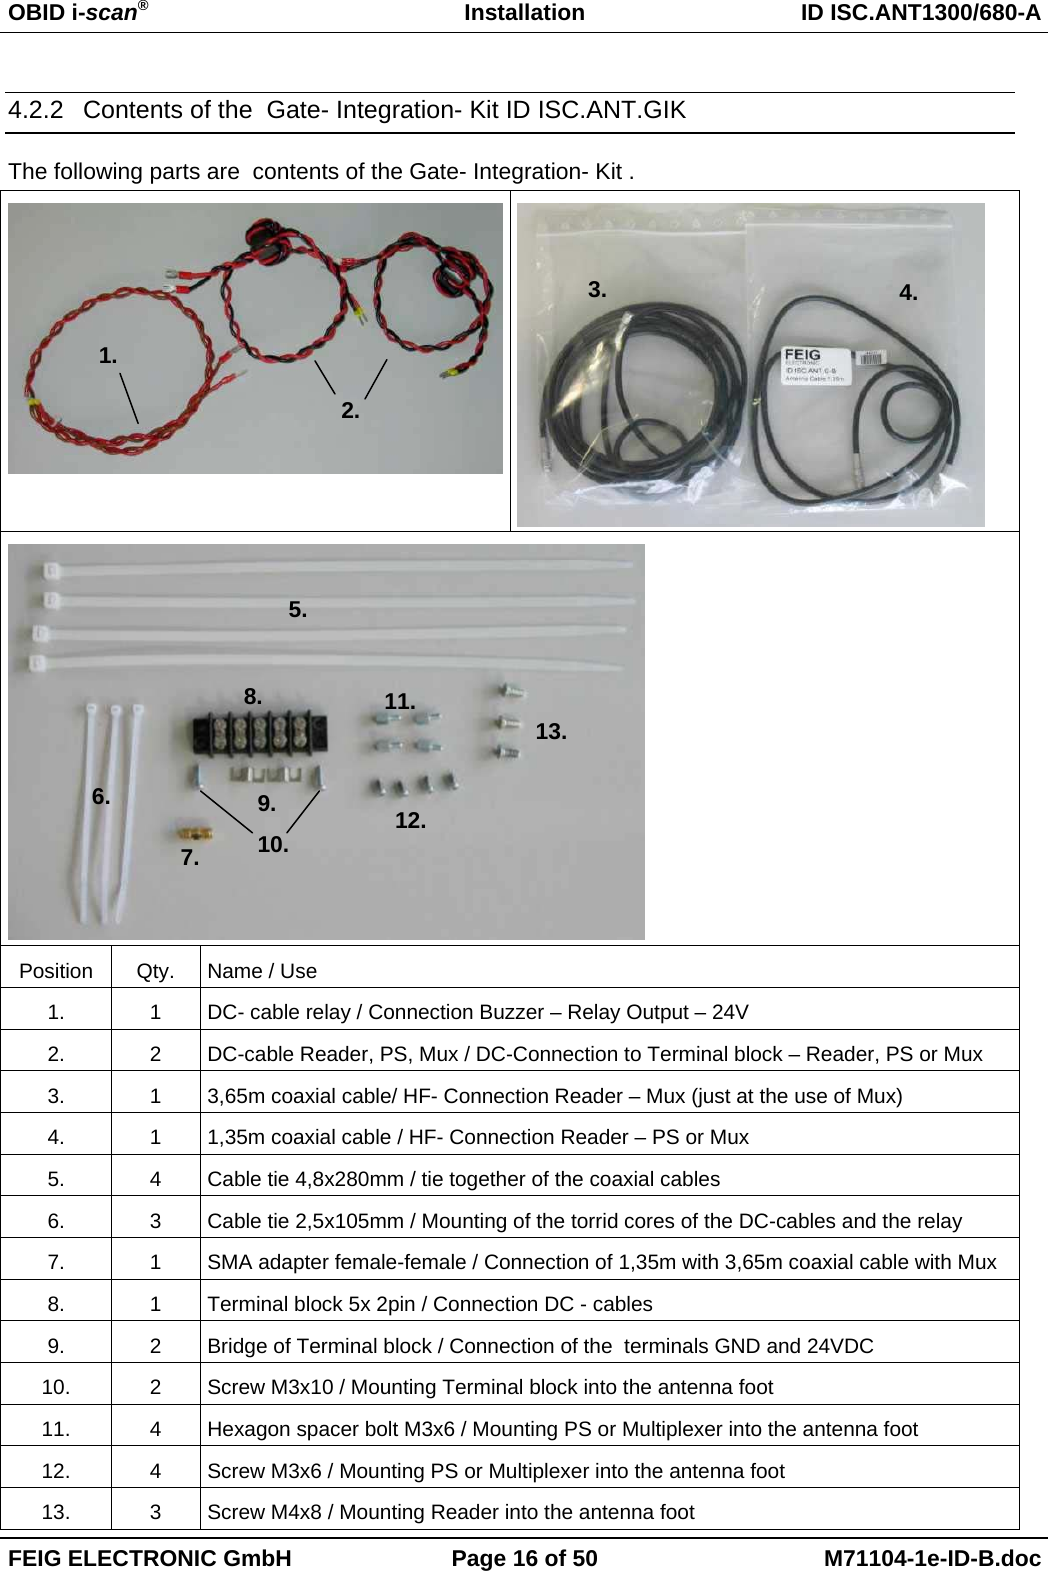 OBID i-scan®Installation ID ISC.ANT1300/680-AFEIG ELECTRONIC GmbH Page 16 of 50 M71104-1e-ID-B.doc4.2.2  Contents of the  Gate- Integration- Kit ID ISC.ANT.GIKThe following parts are  contents of the Gate- Integration- Kit .Position Qty. Name / Use1. 1 DC- cable relay / Connection Buzzer – Relay Output – 24V2. 2 DC-cable Reader, PS, Mux / DC-Connection to Terminal block – Reader, PS or Mux3. 1 3,65m coaxial cable/ HF- Connection Reader – Mux (just at the use of Mux)4. 1 1,35m coaxial cable / HF- Connection Reader – PS or Mux5. 4 Cable tie 4,8x280mm / tie together of the coaxial cables6. 3 Cable tie 2,5x105mm / Mounting of the torrid cores of the DC-cables and the relay7. 1 SMA adapter female-female / Connection of 1,35m with 3,65m coaxial cable with Mux8. 1 Terminal block 5x 2pin / Connection DC - cables9. 2 Bridge of Terminal block / Connection of the  terminals GND and 24VDC10. 2 Screw M3x10 / Mounting Terminal block into the antenna foot11. 4 Hexagon spacer bolt M3x6 / Mounting PS or Multiplexer into the antenna foot12. 4 Screw M3x6 / Mounting PS or Multiplexer into the antenna foot13. 3 Screw M4x8 / Mounting Reader into the antenna foot1.2.4.3.5.6.7.8.9.10.11.12.13.